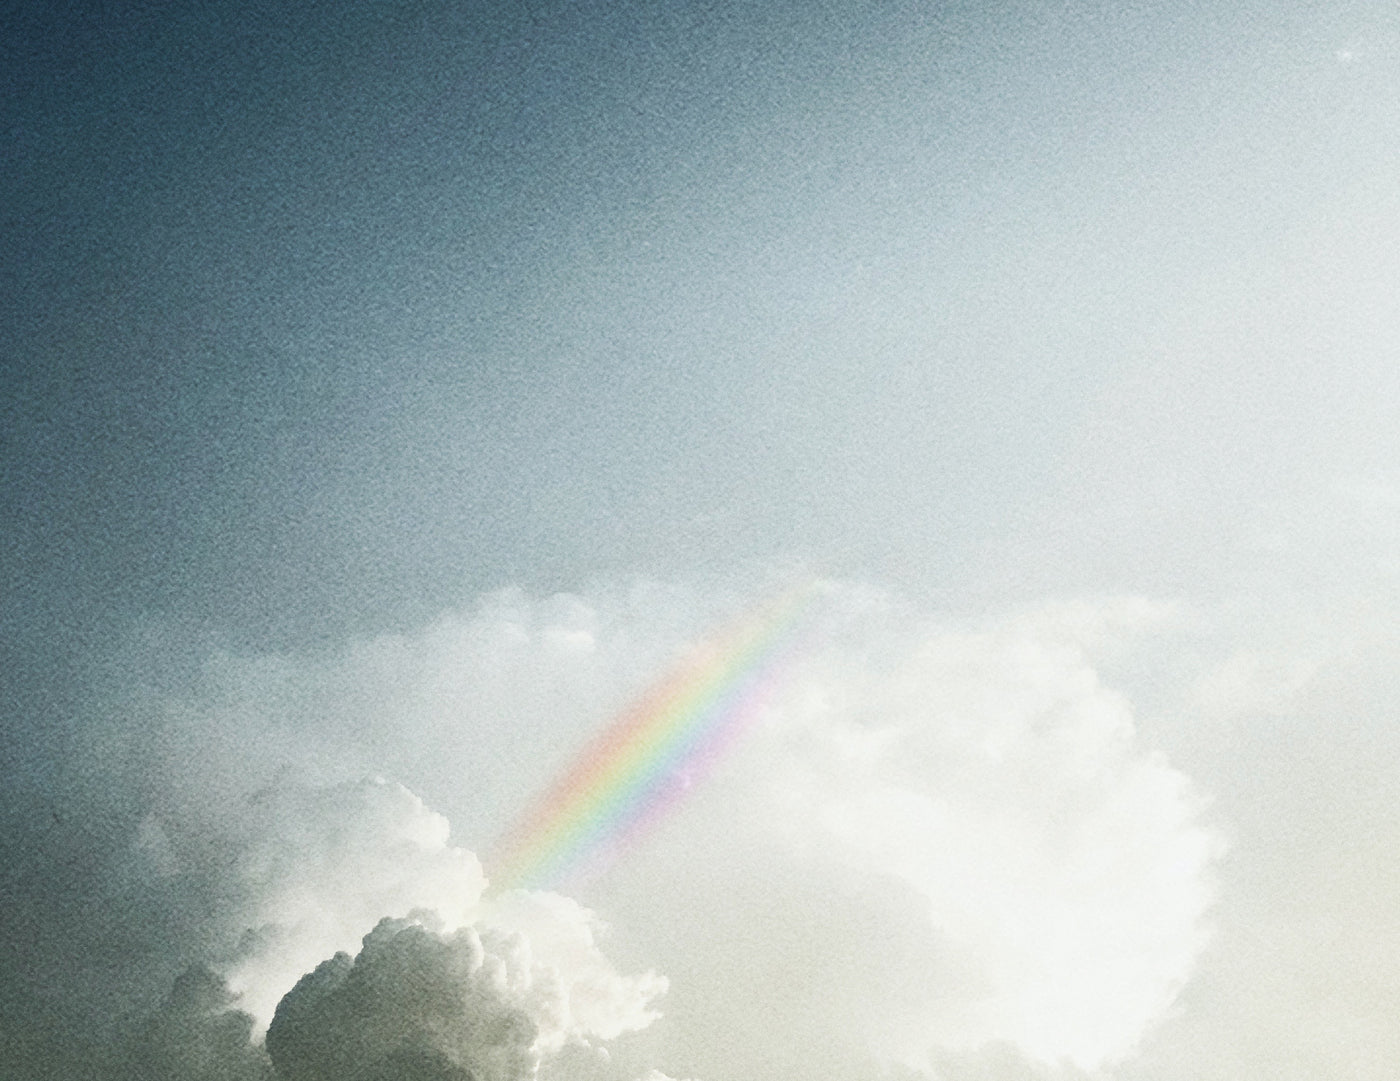 image of clouds and rainbow